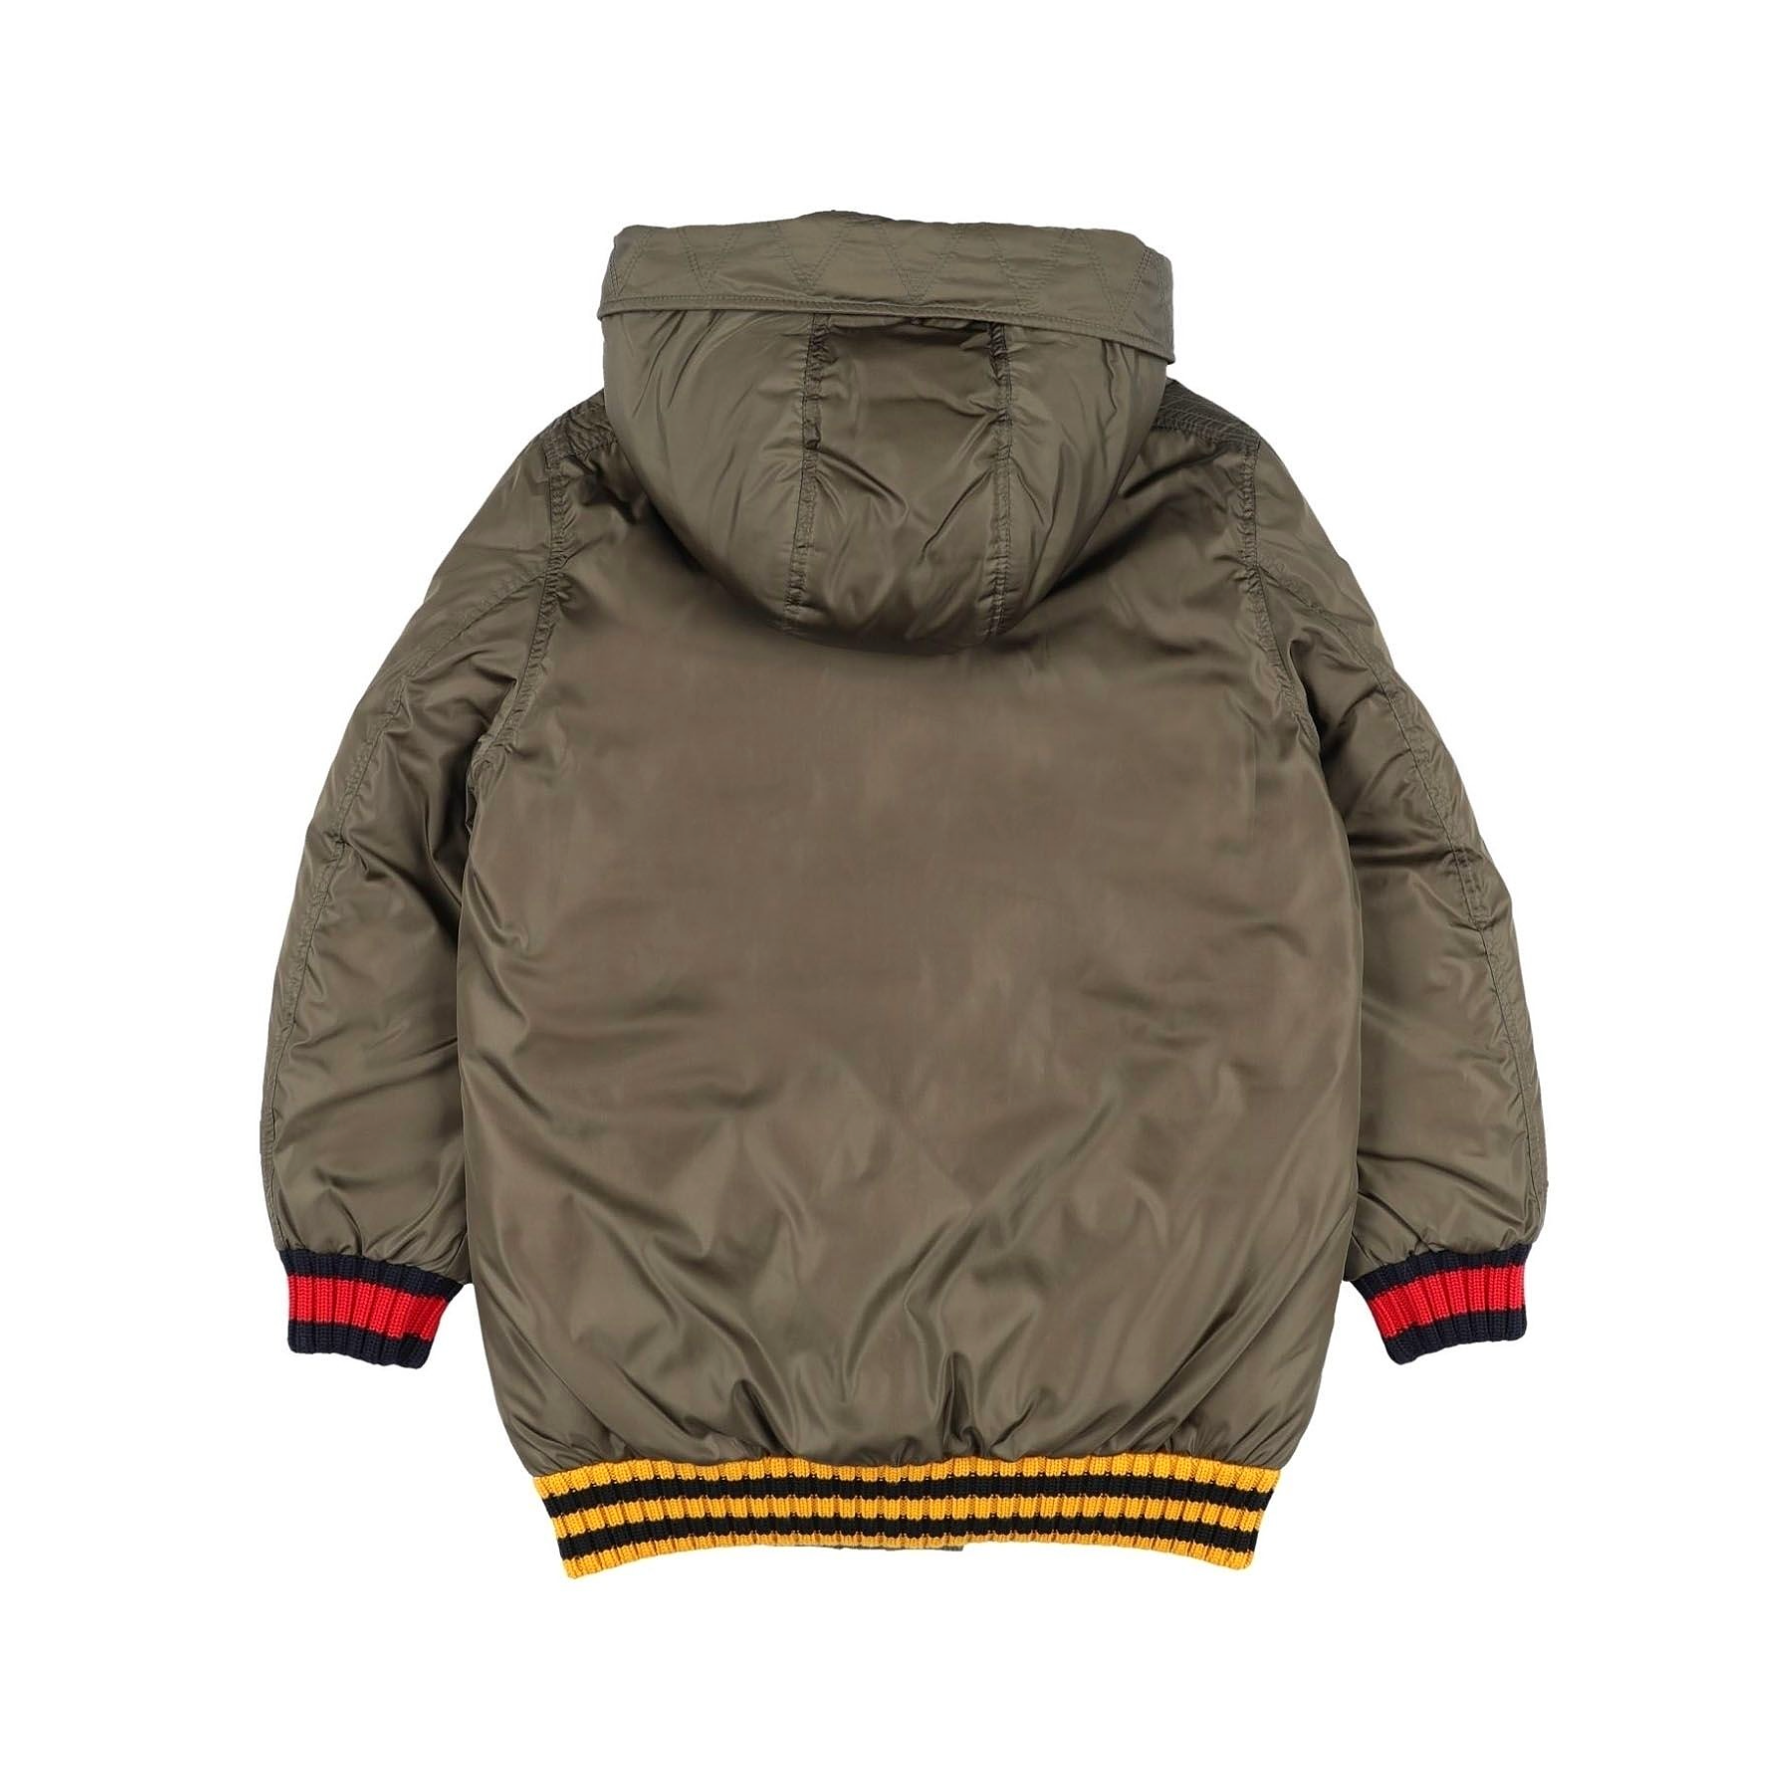 GUCCI - Khaki down jacket with bee logo - 8 years old